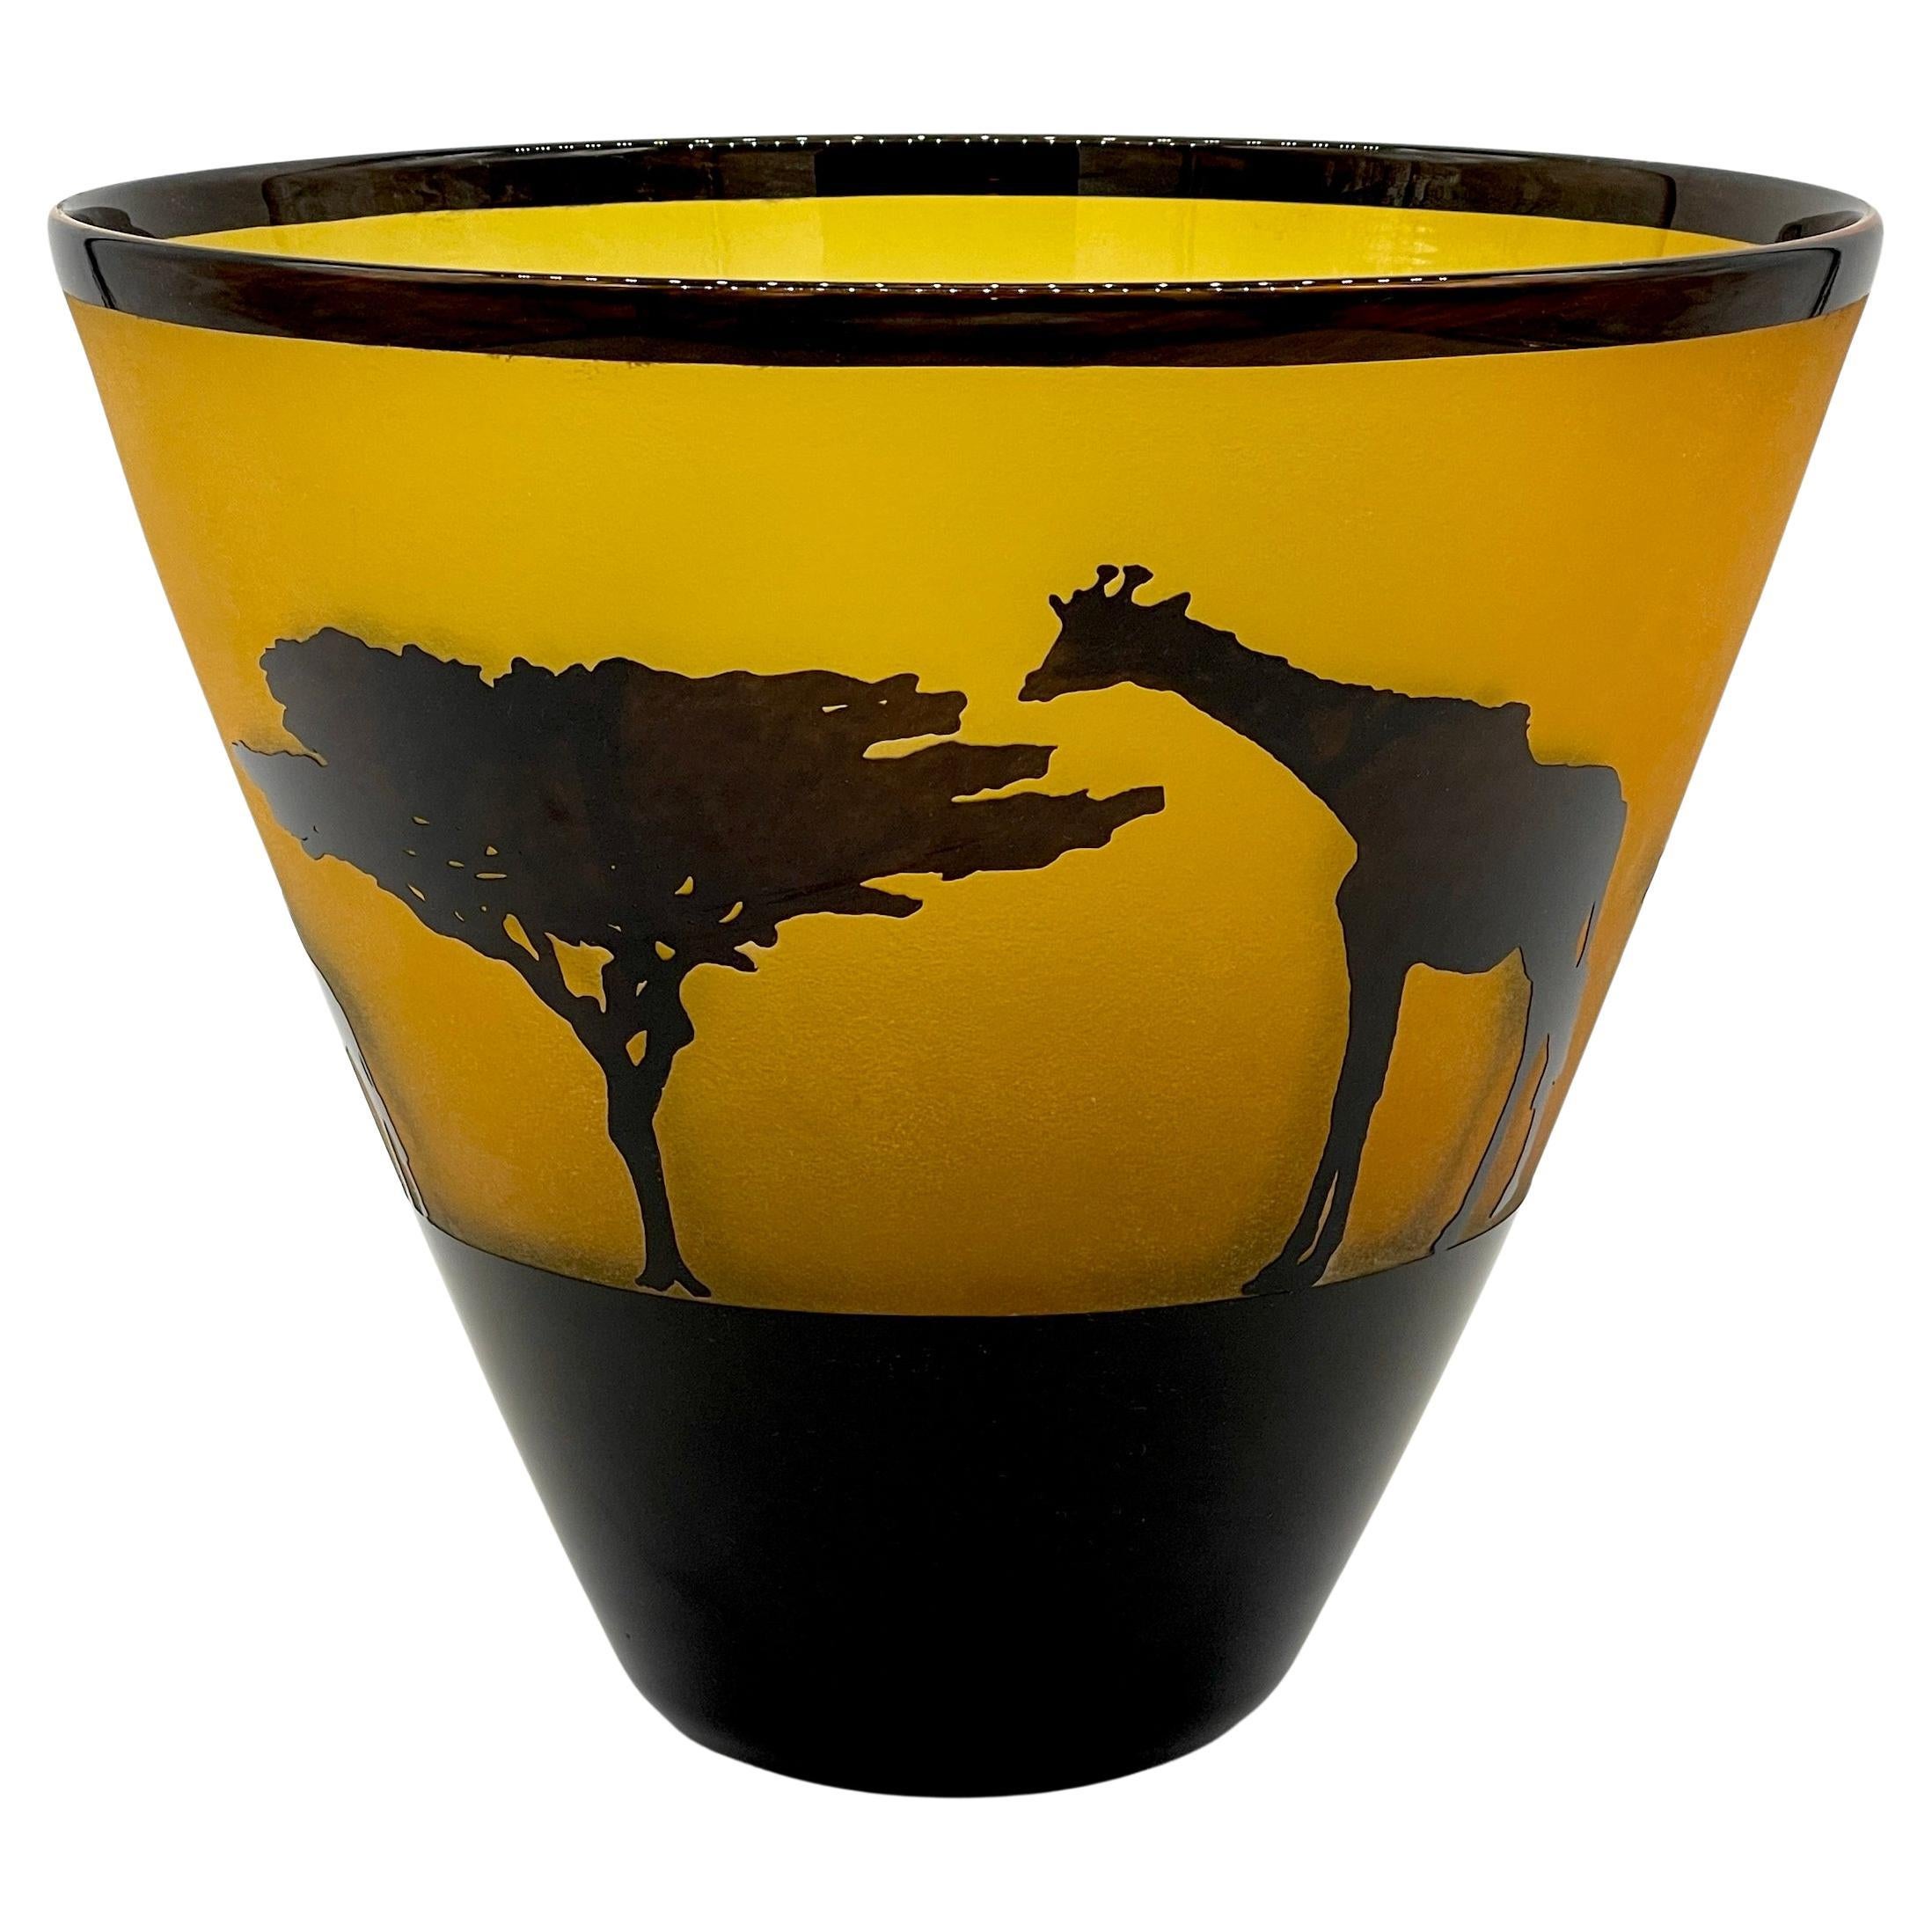 African Landscape Cameo Glass Vase by Steven Correia, 1986 Edition of #168/500
USA, Produced in 1986, Limited Edition of #168/500
Correia Art Glass founded in 1973 in Santa Monica, Calif., by glass artist, Steven V. Correia.

A stunning good sized